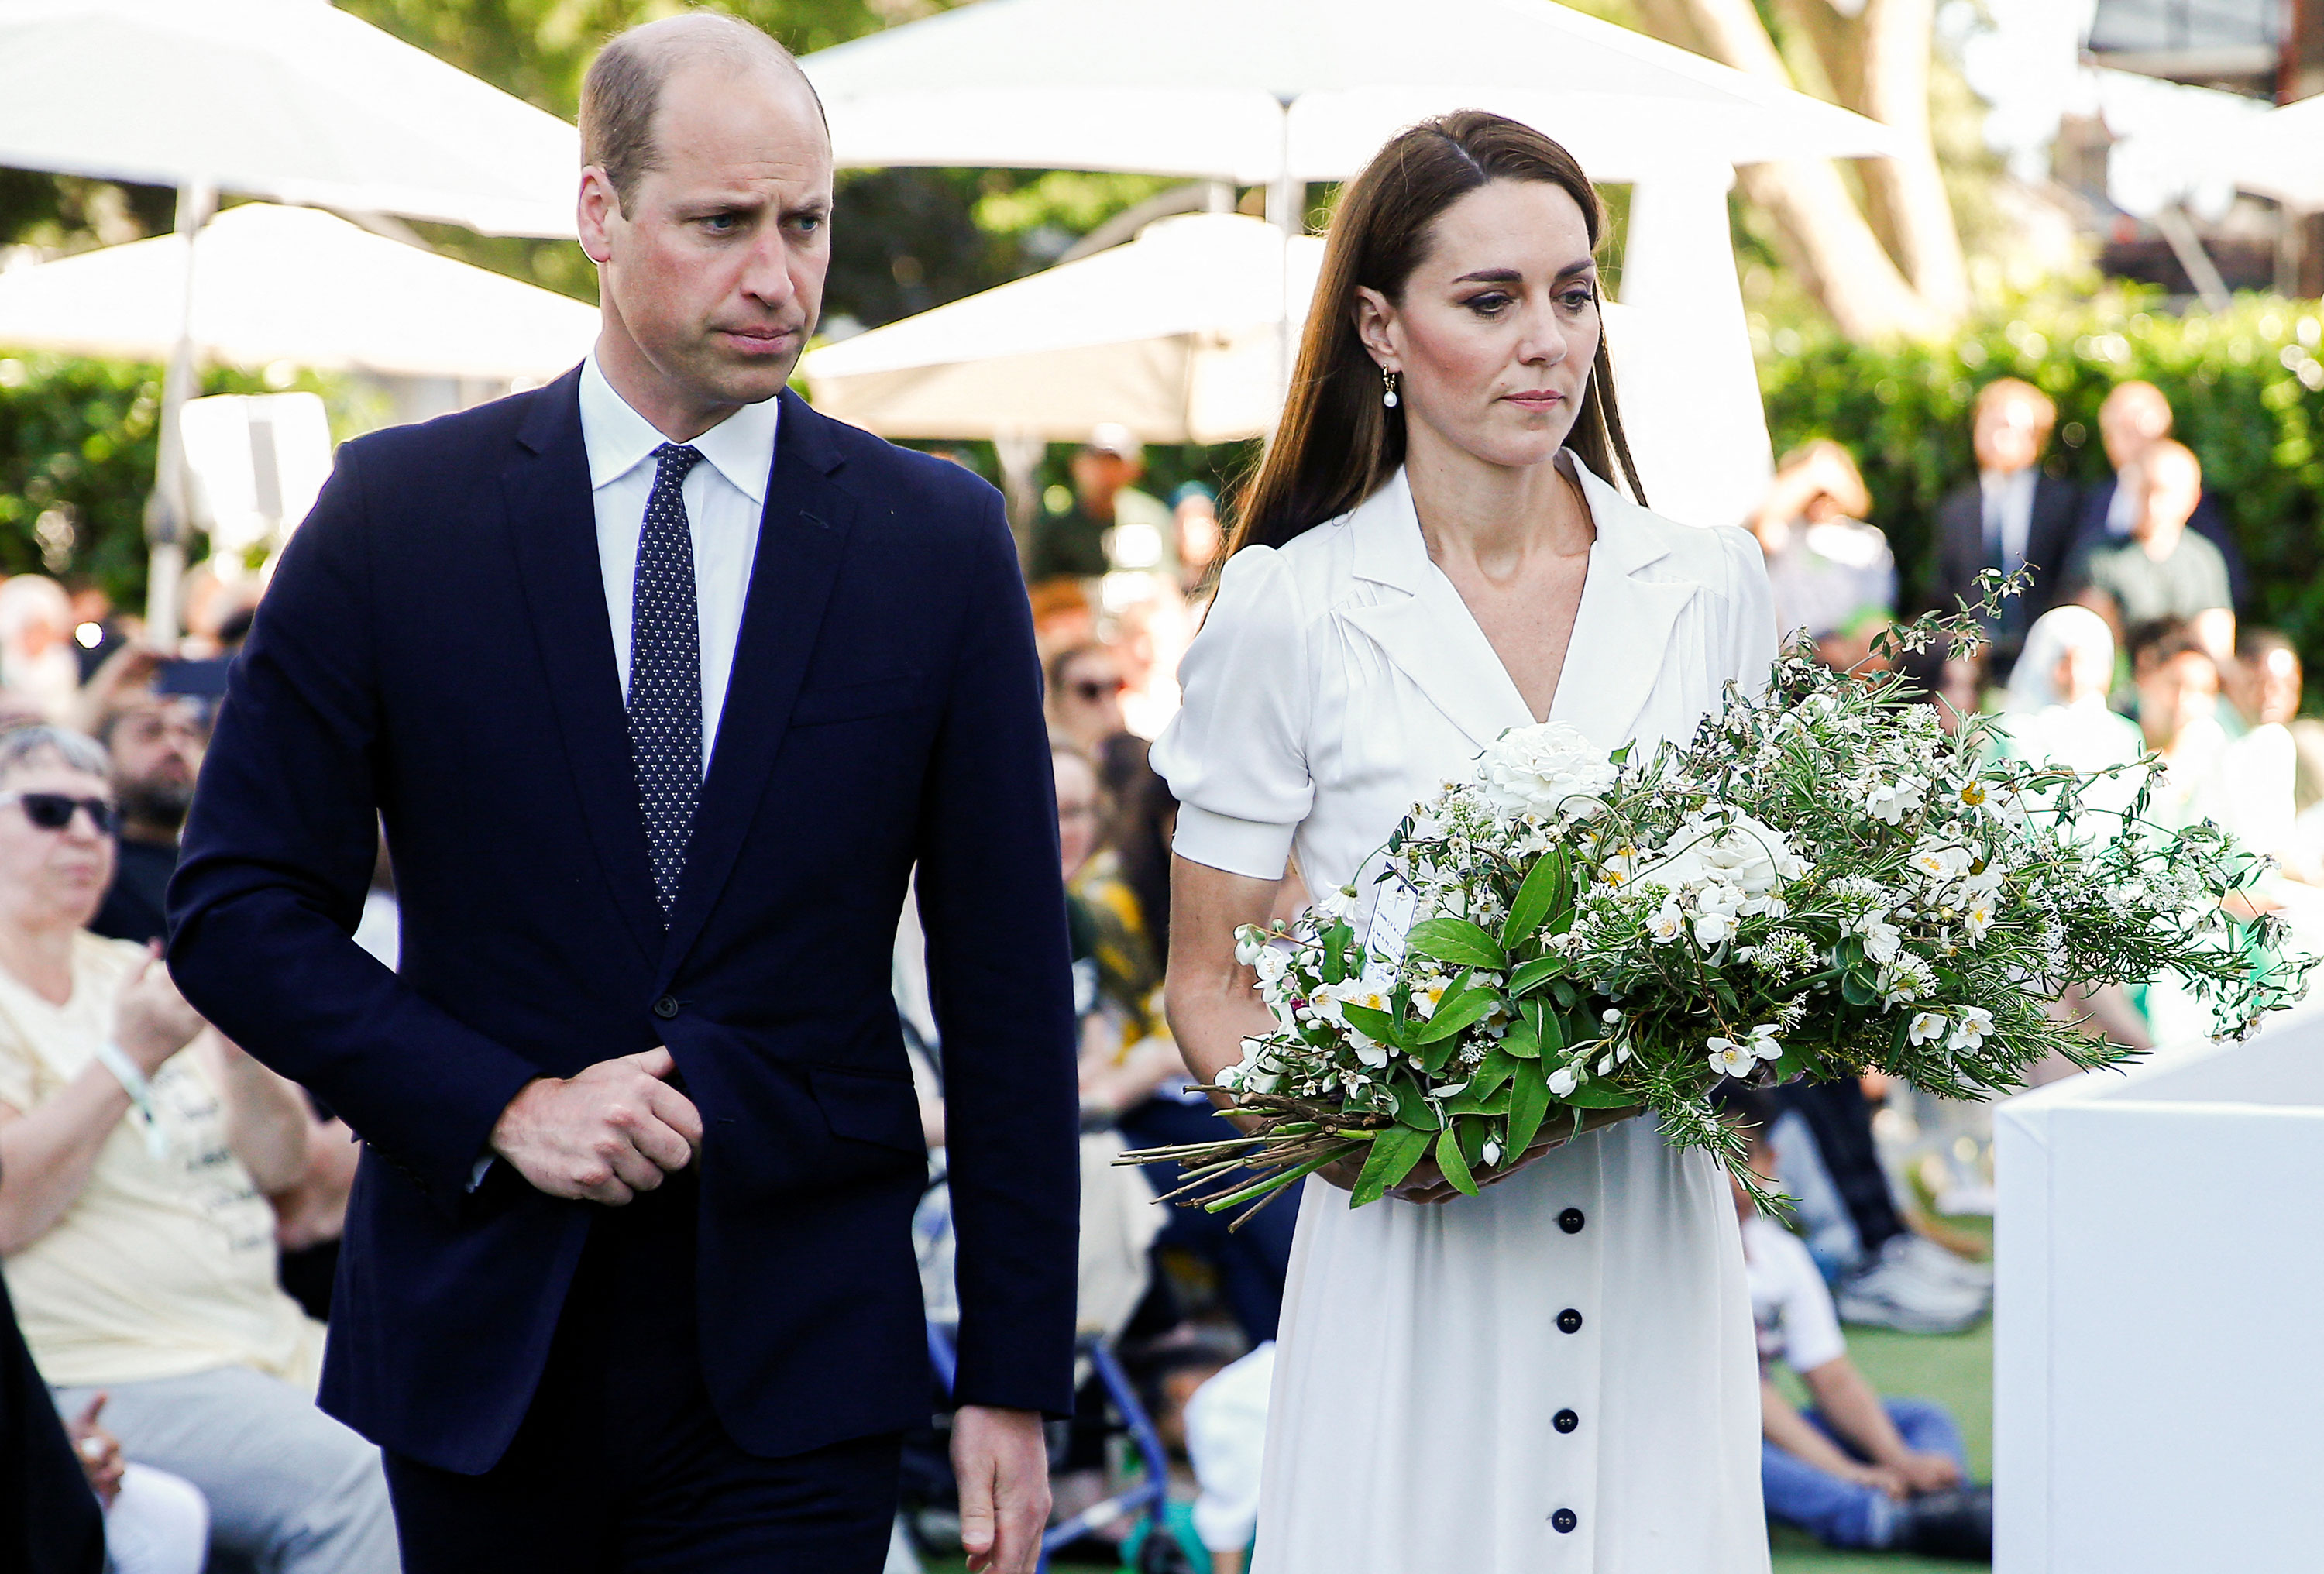 Prince William and Catherine are seen in June 2022 in London.